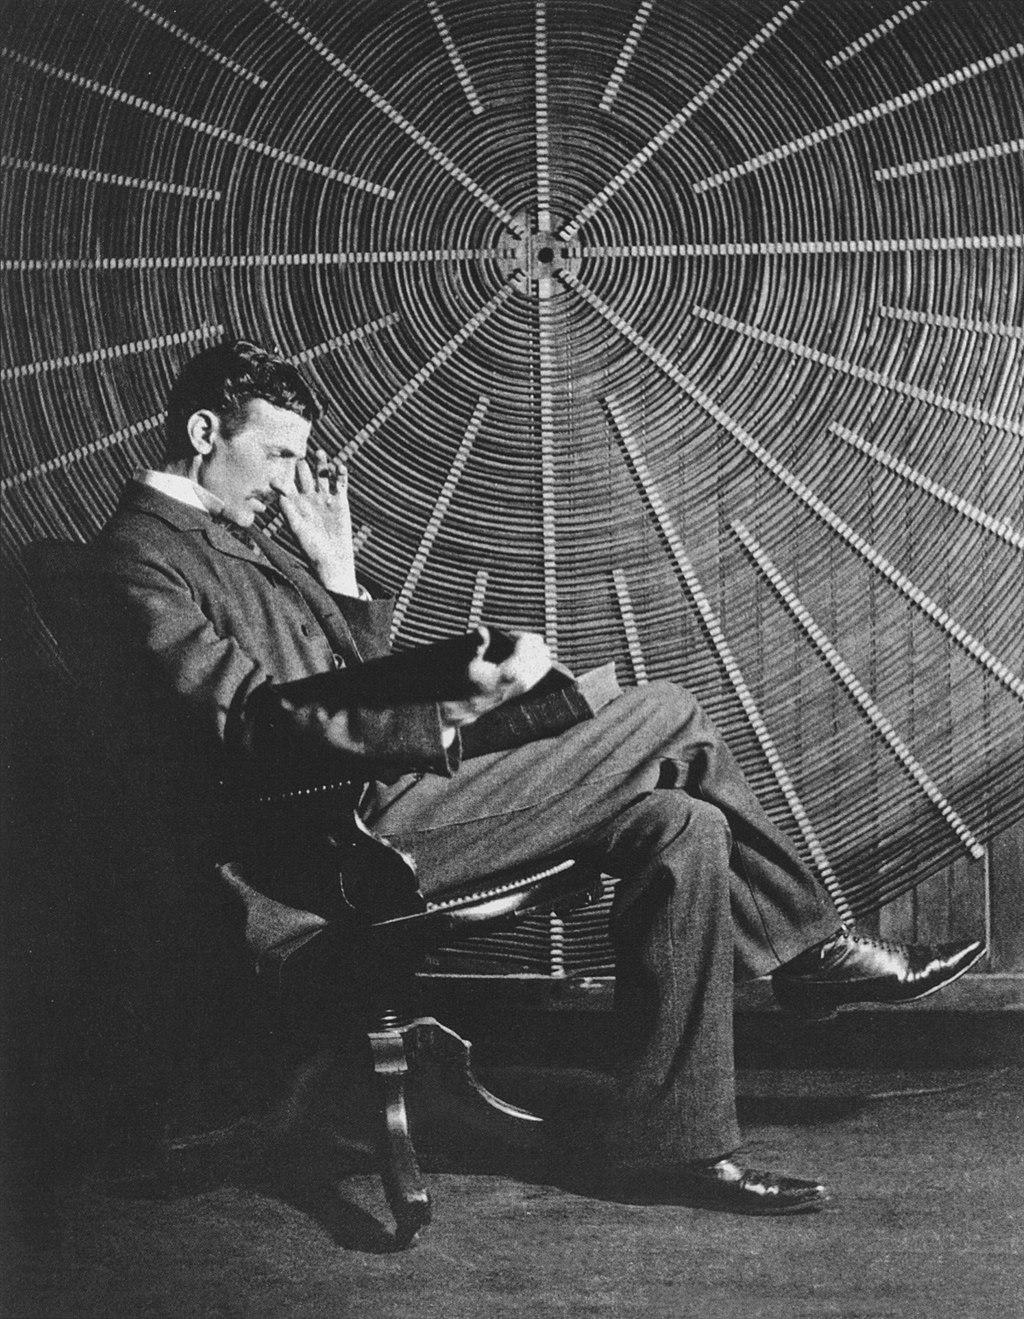 Nikola Tesla sitting in front of a spiral coil used in his wireless power experiments at his East Houston St. laboratory in New York. (Public Domain)